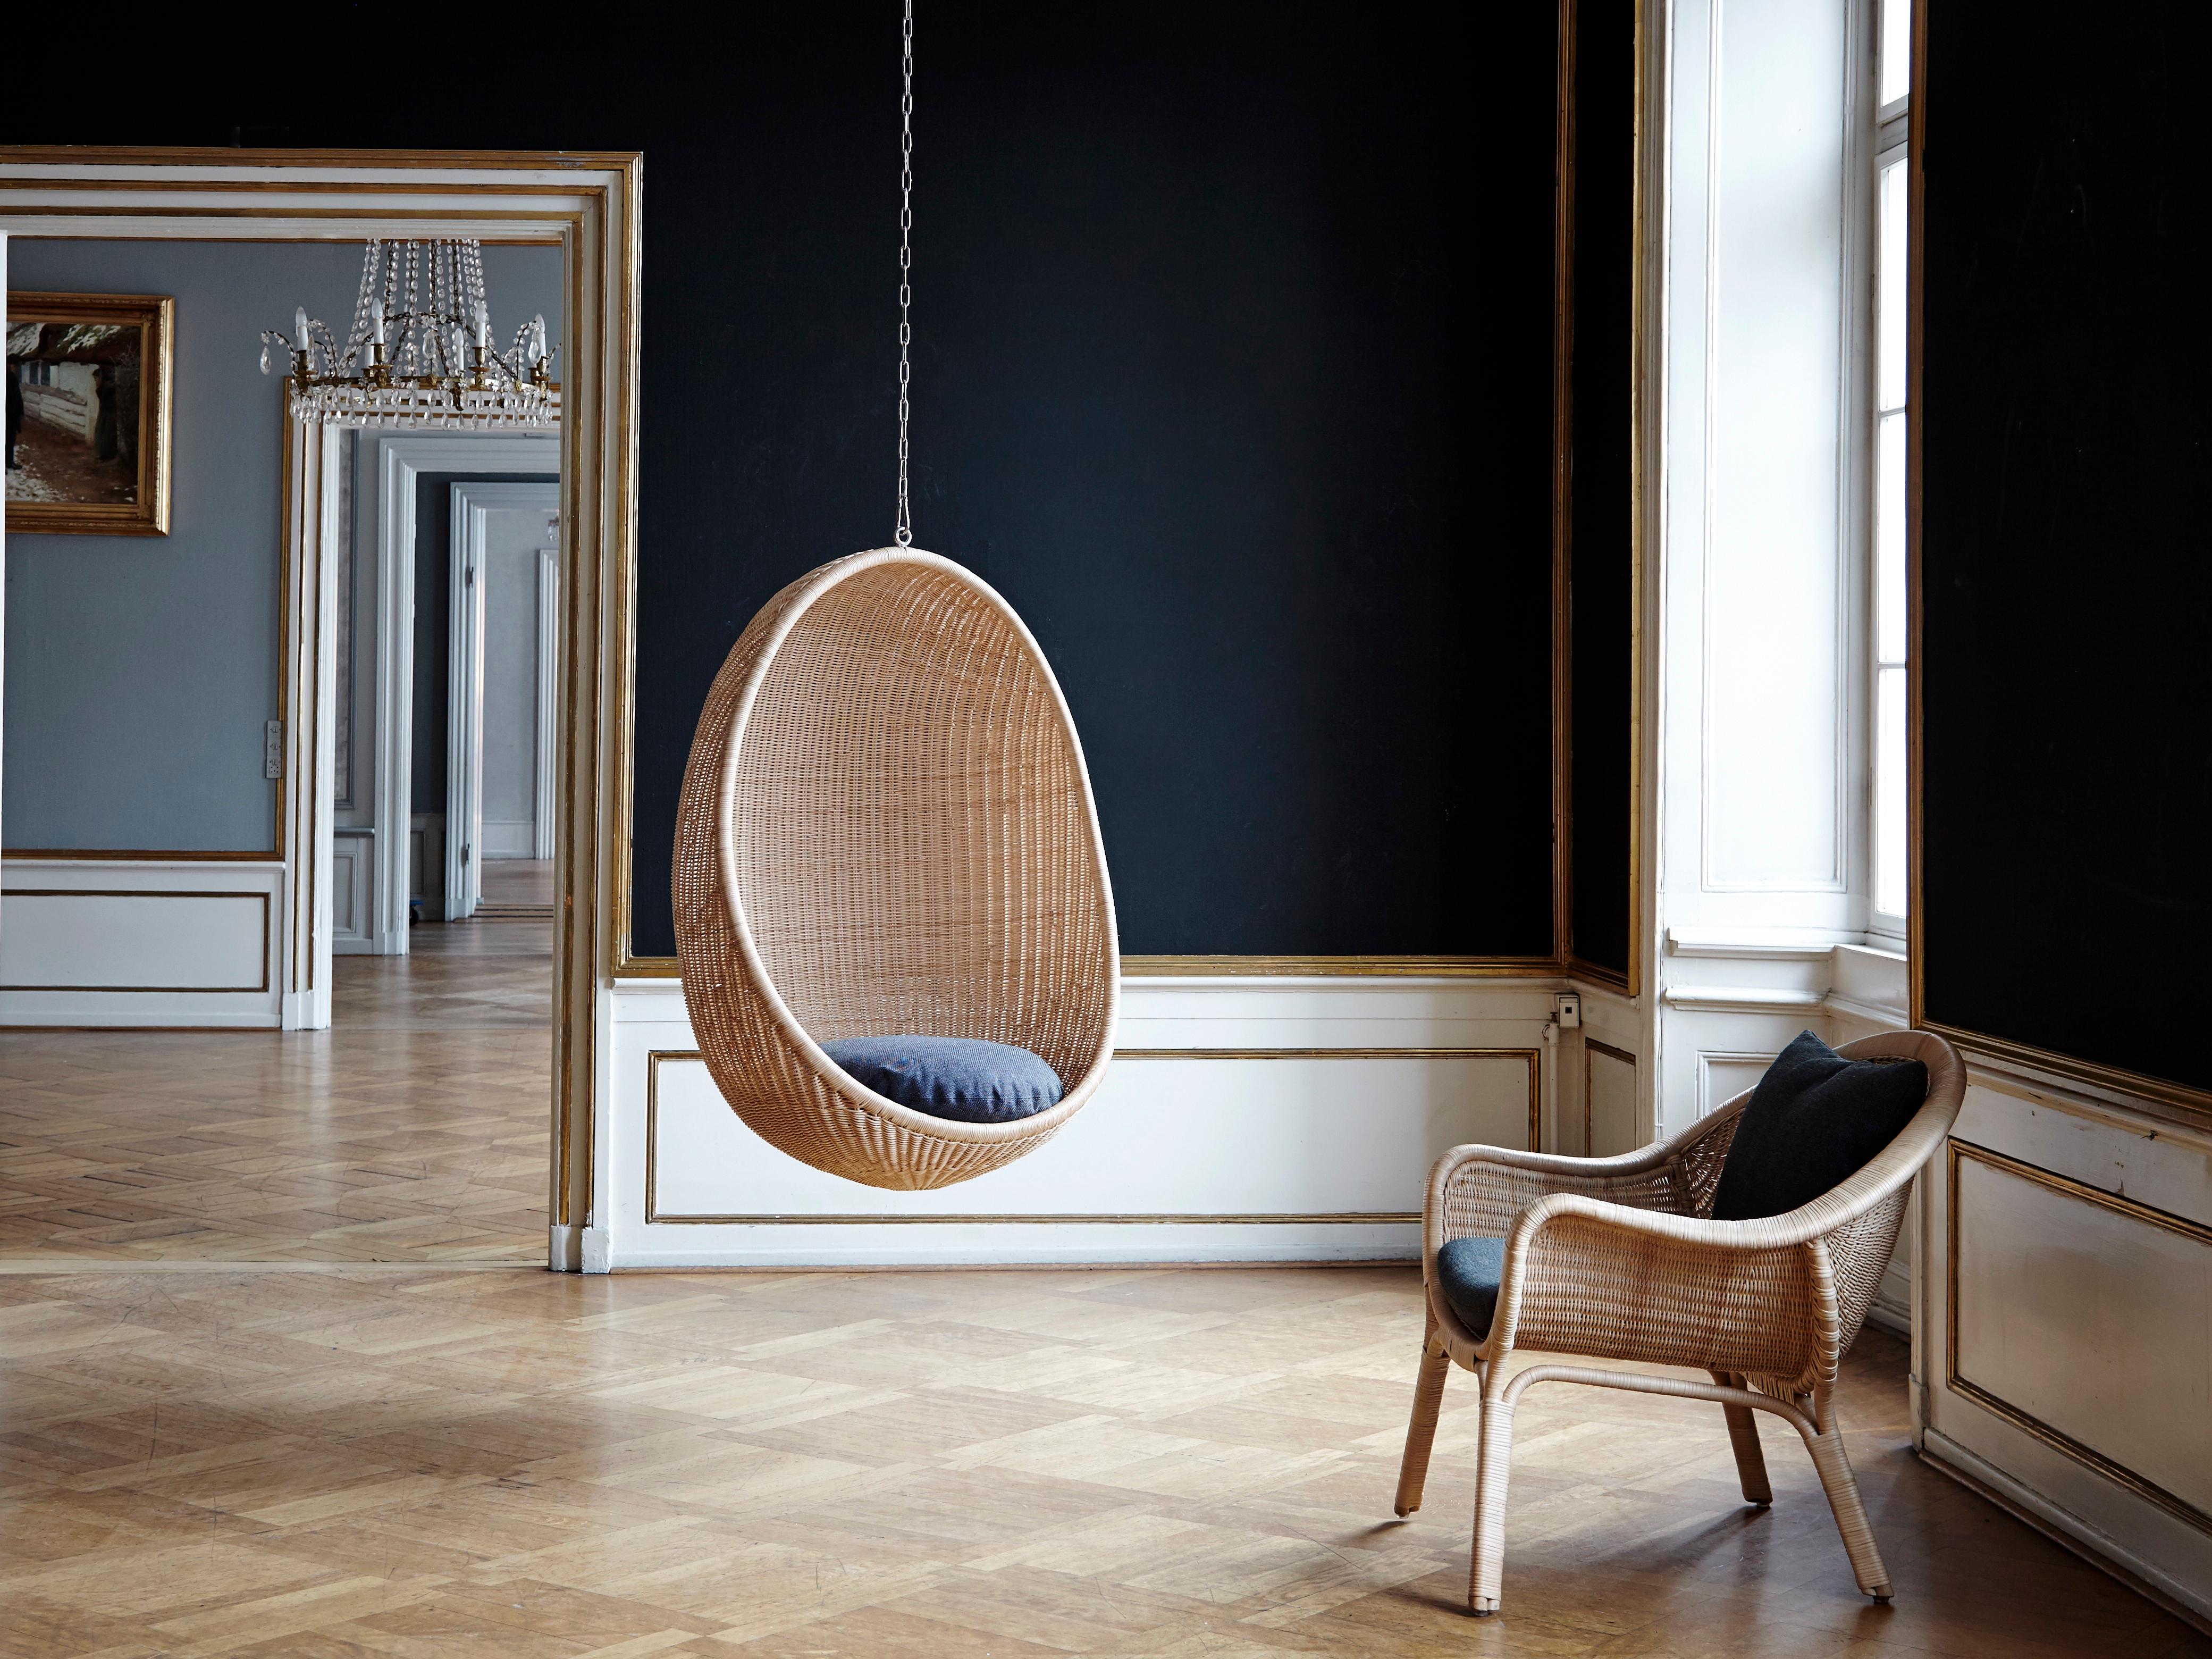 Egg hanging chair. Hanging egg is designed by Nanna Ditzel, and is in itself a design icon in Danish design. Originally the swing was produced in rattan, but for our exterior collection we have used materials which can stand all weather, so you can